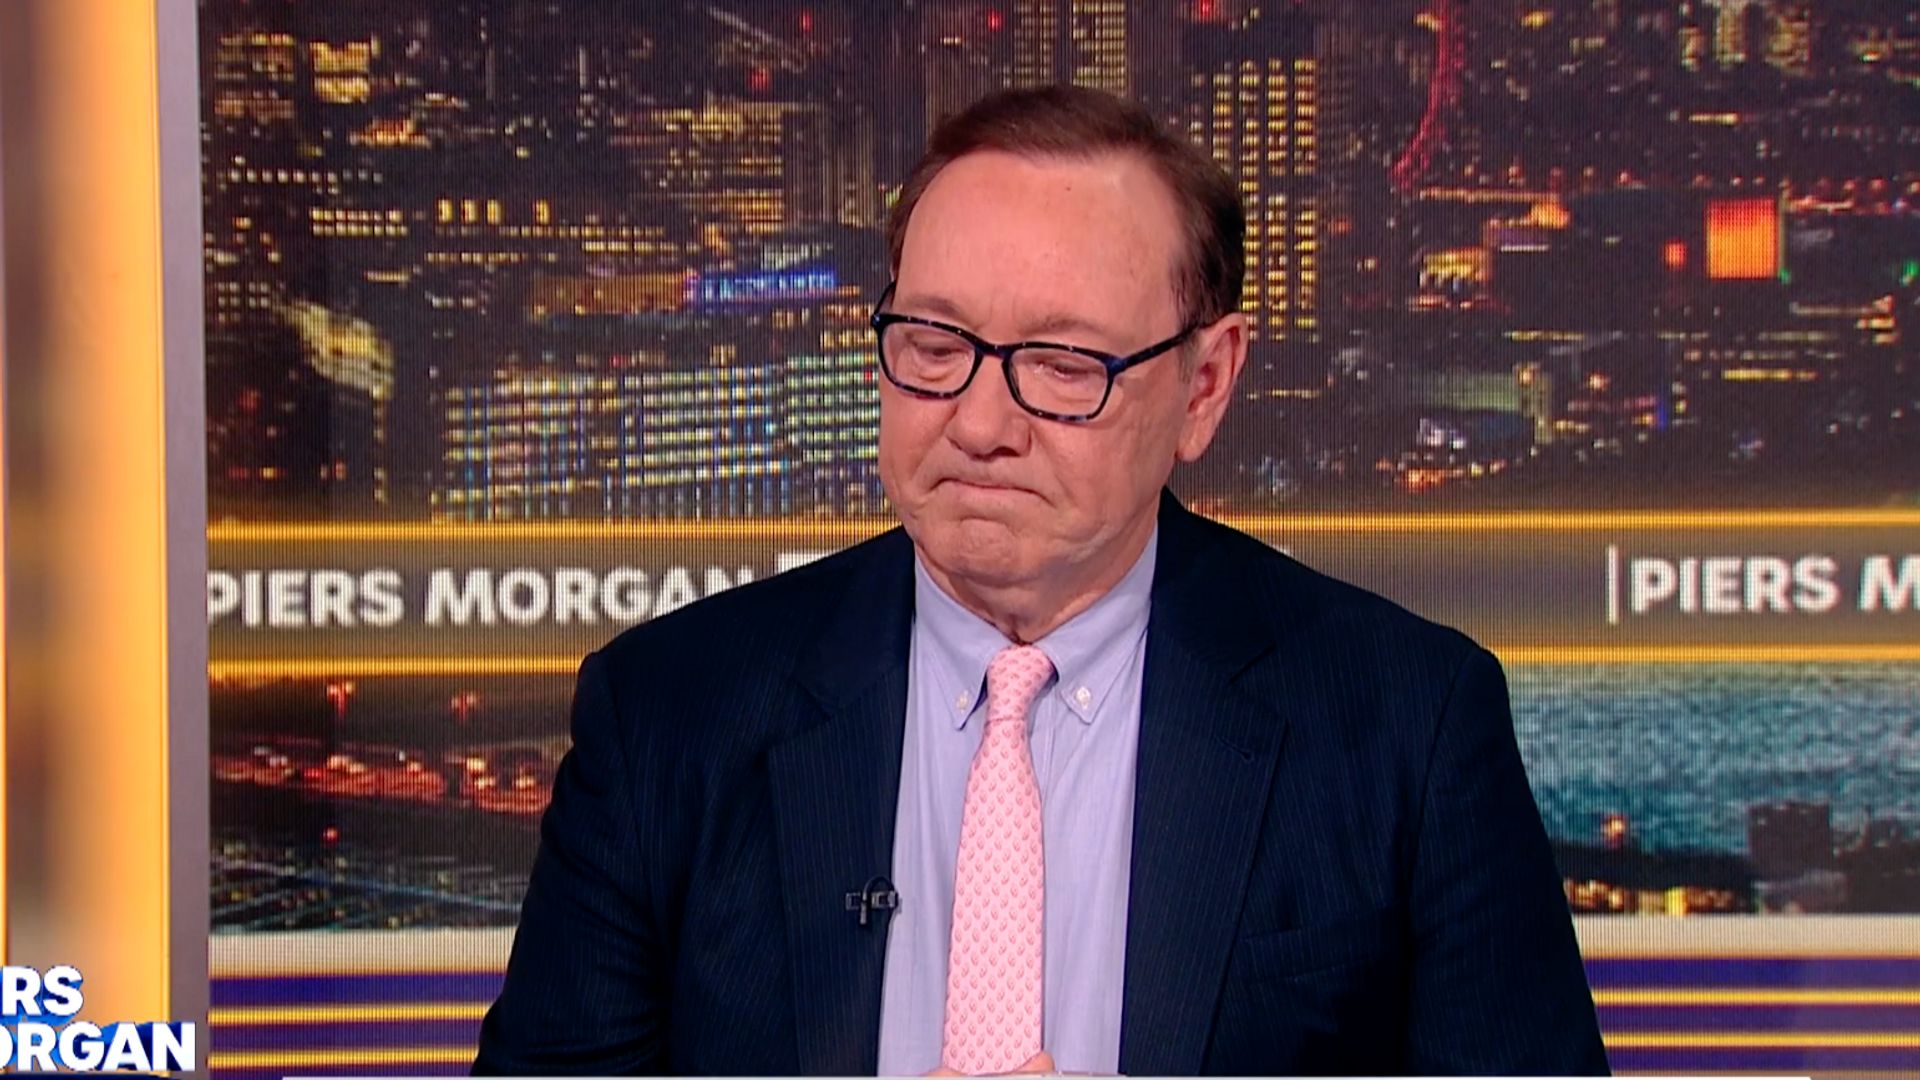 Kevin Spacey’s interview with Piers Morgan: biggest revelations from emotional interview